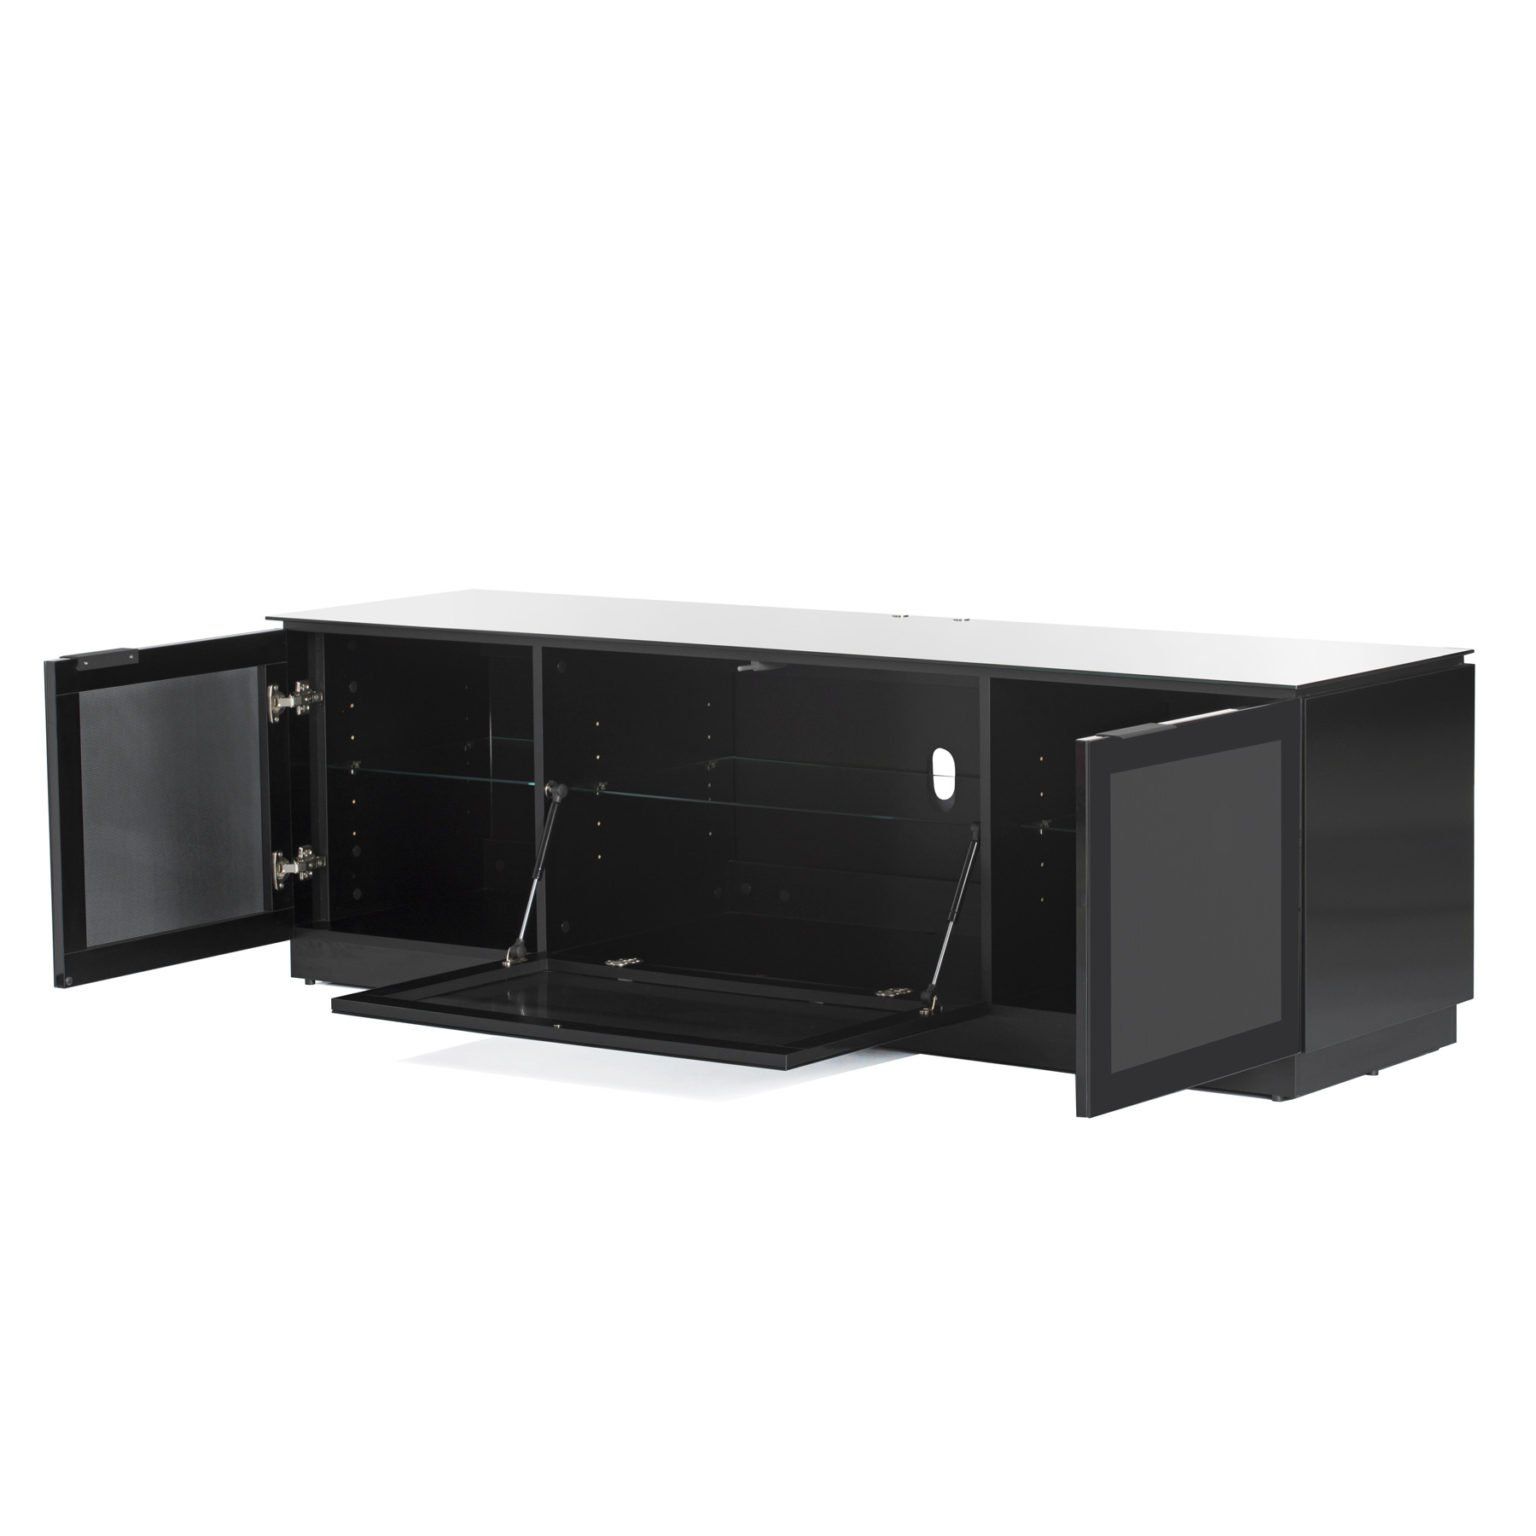 Black Gloss Tv Unit Up To 80 Inch Flat Screen Tv | Mmt D1800 Intended For Dillon Black Tv Unit Stands (View 15 of 15)